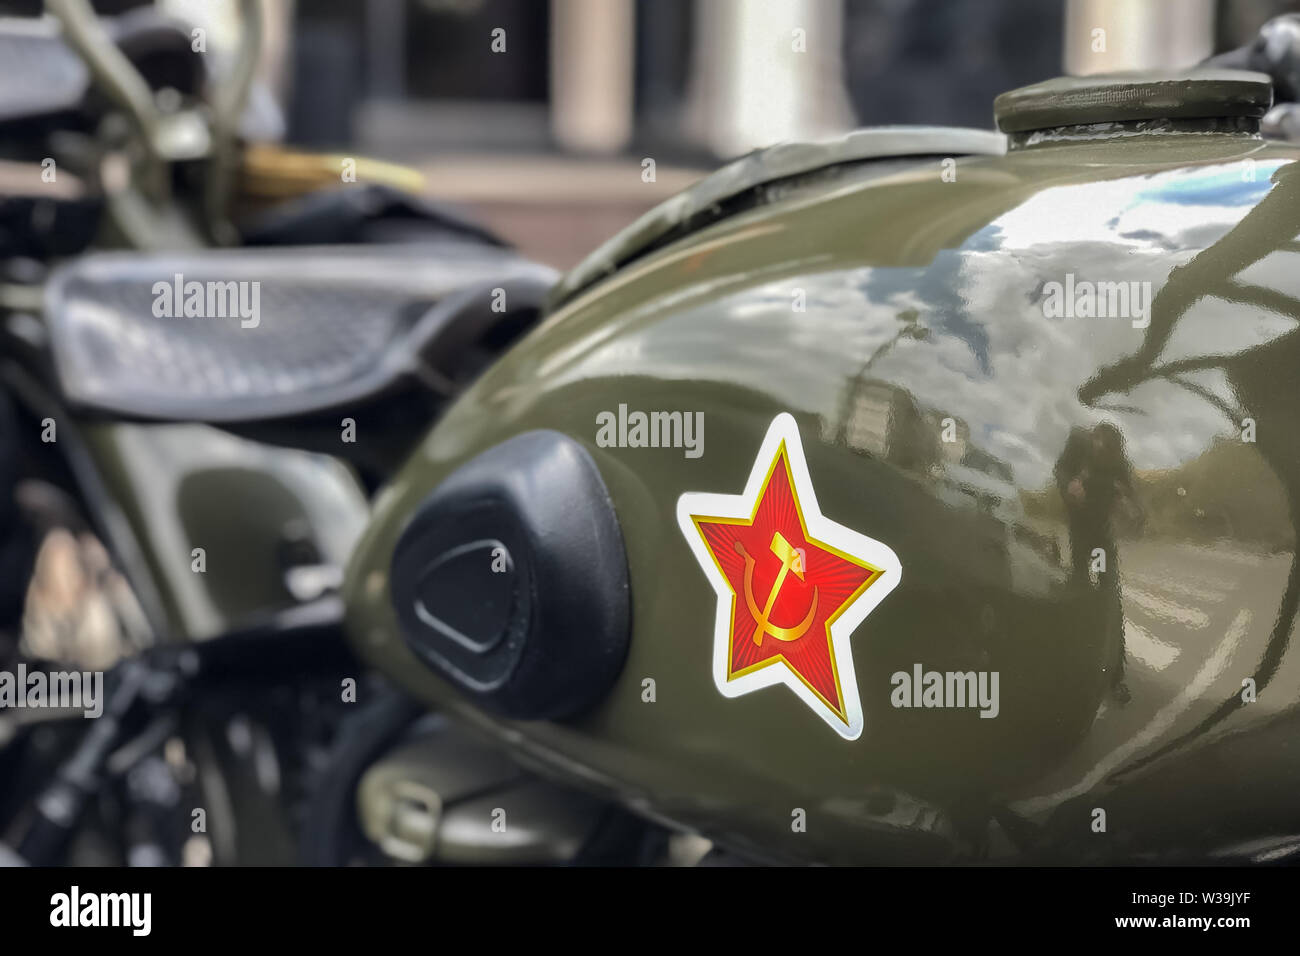 Soviet star and hammer and sickle on the gas tank of the Soviet motorcycle URAL, close-up. Stock Photo